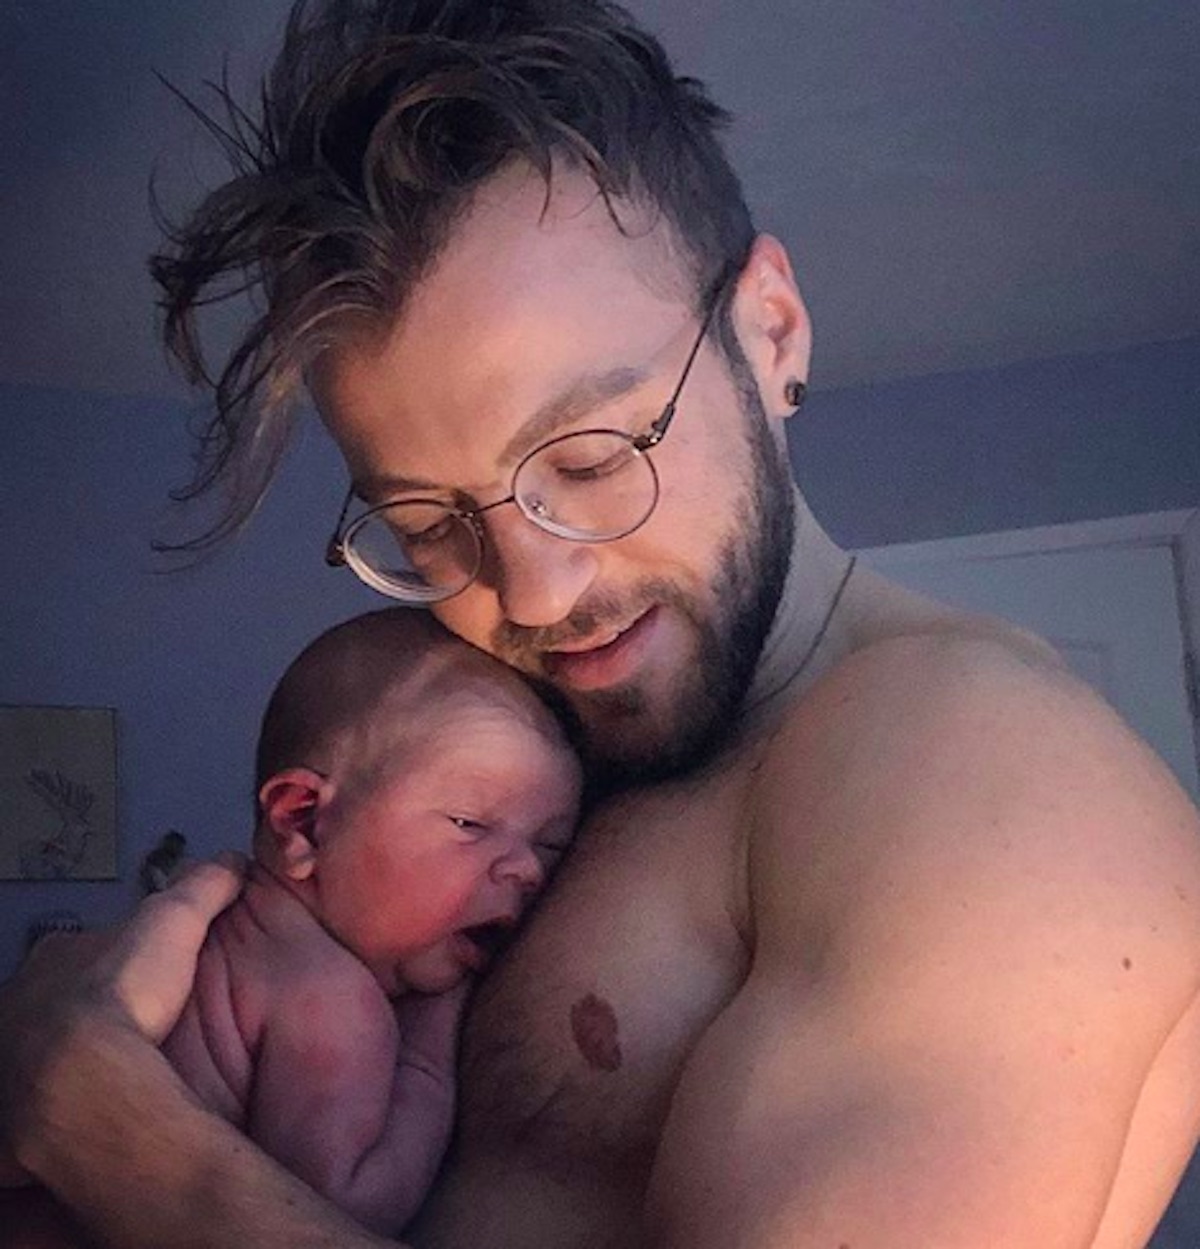 Trans man Aydian Dowlings wife gives birth to their first child PinkNews